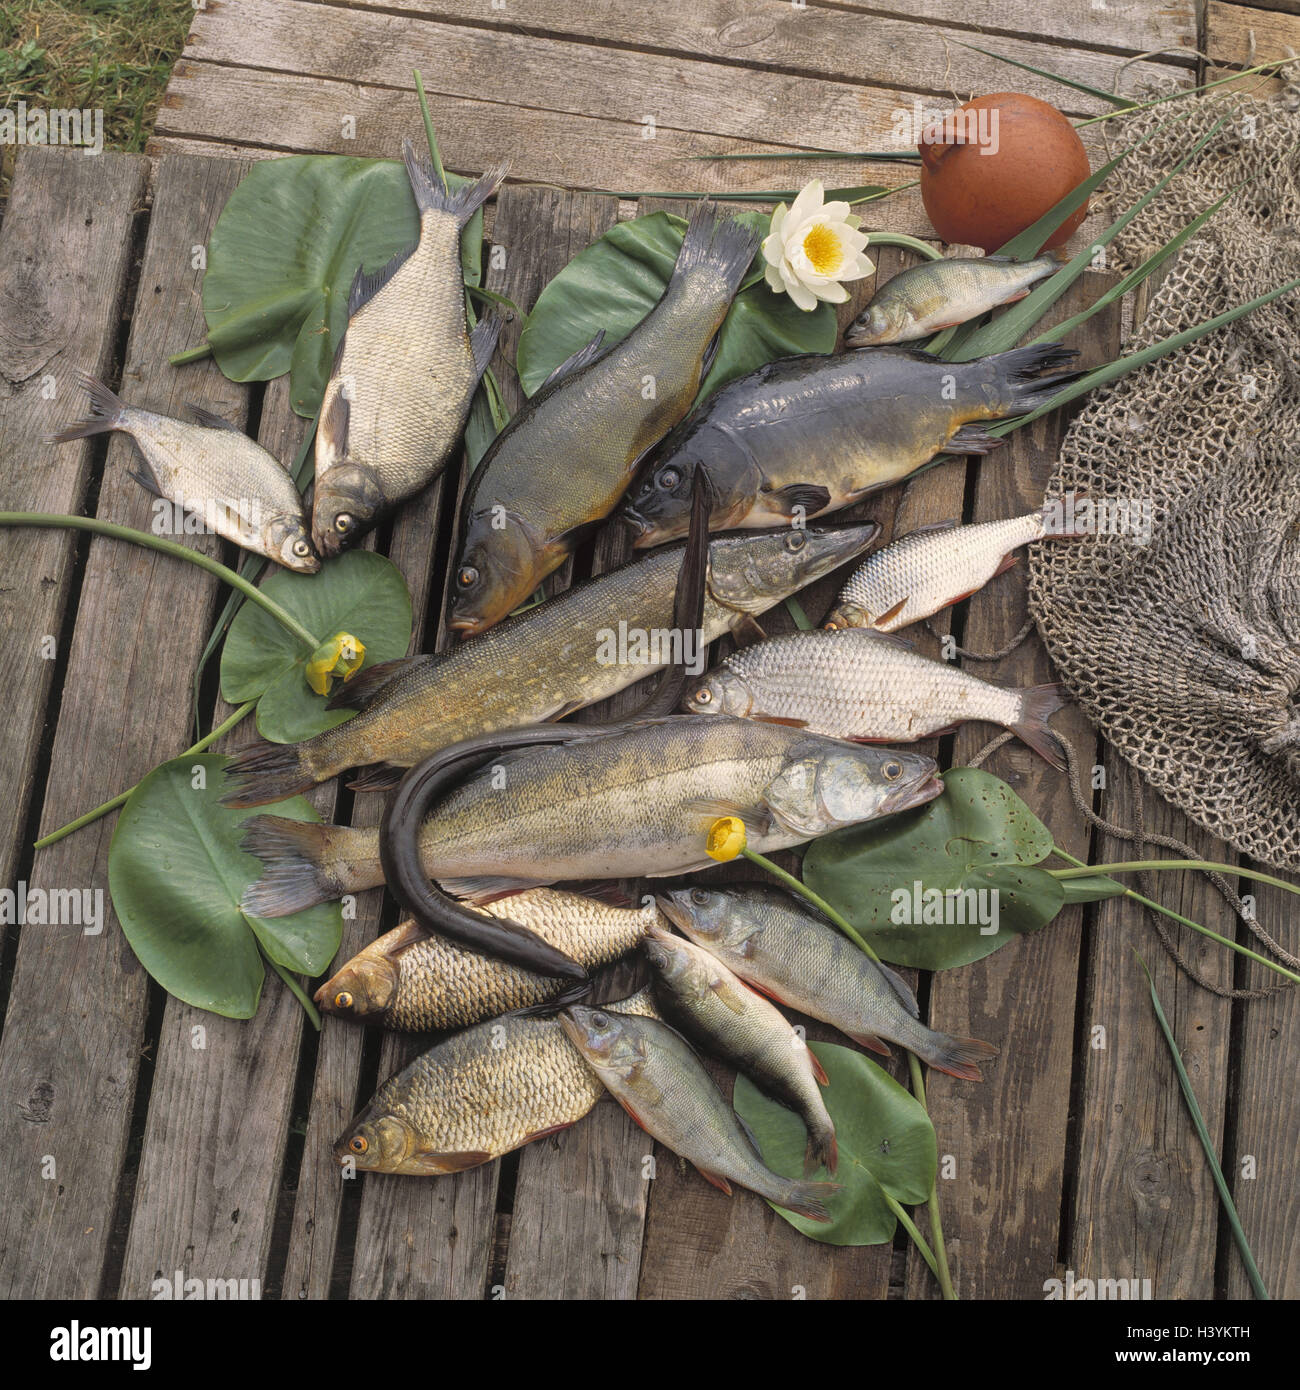 Landing stage, fishing, fish, freshly, deadly bridge, eel, perch, braces, Güster, pike, carp, red eye, rudd, tench, pikeperch, freshwater fishes, food fish, benefit fish, fish fauna, freshwater fishing, fish stock, Europe, Germany, North Germany, product photography Stock Photo